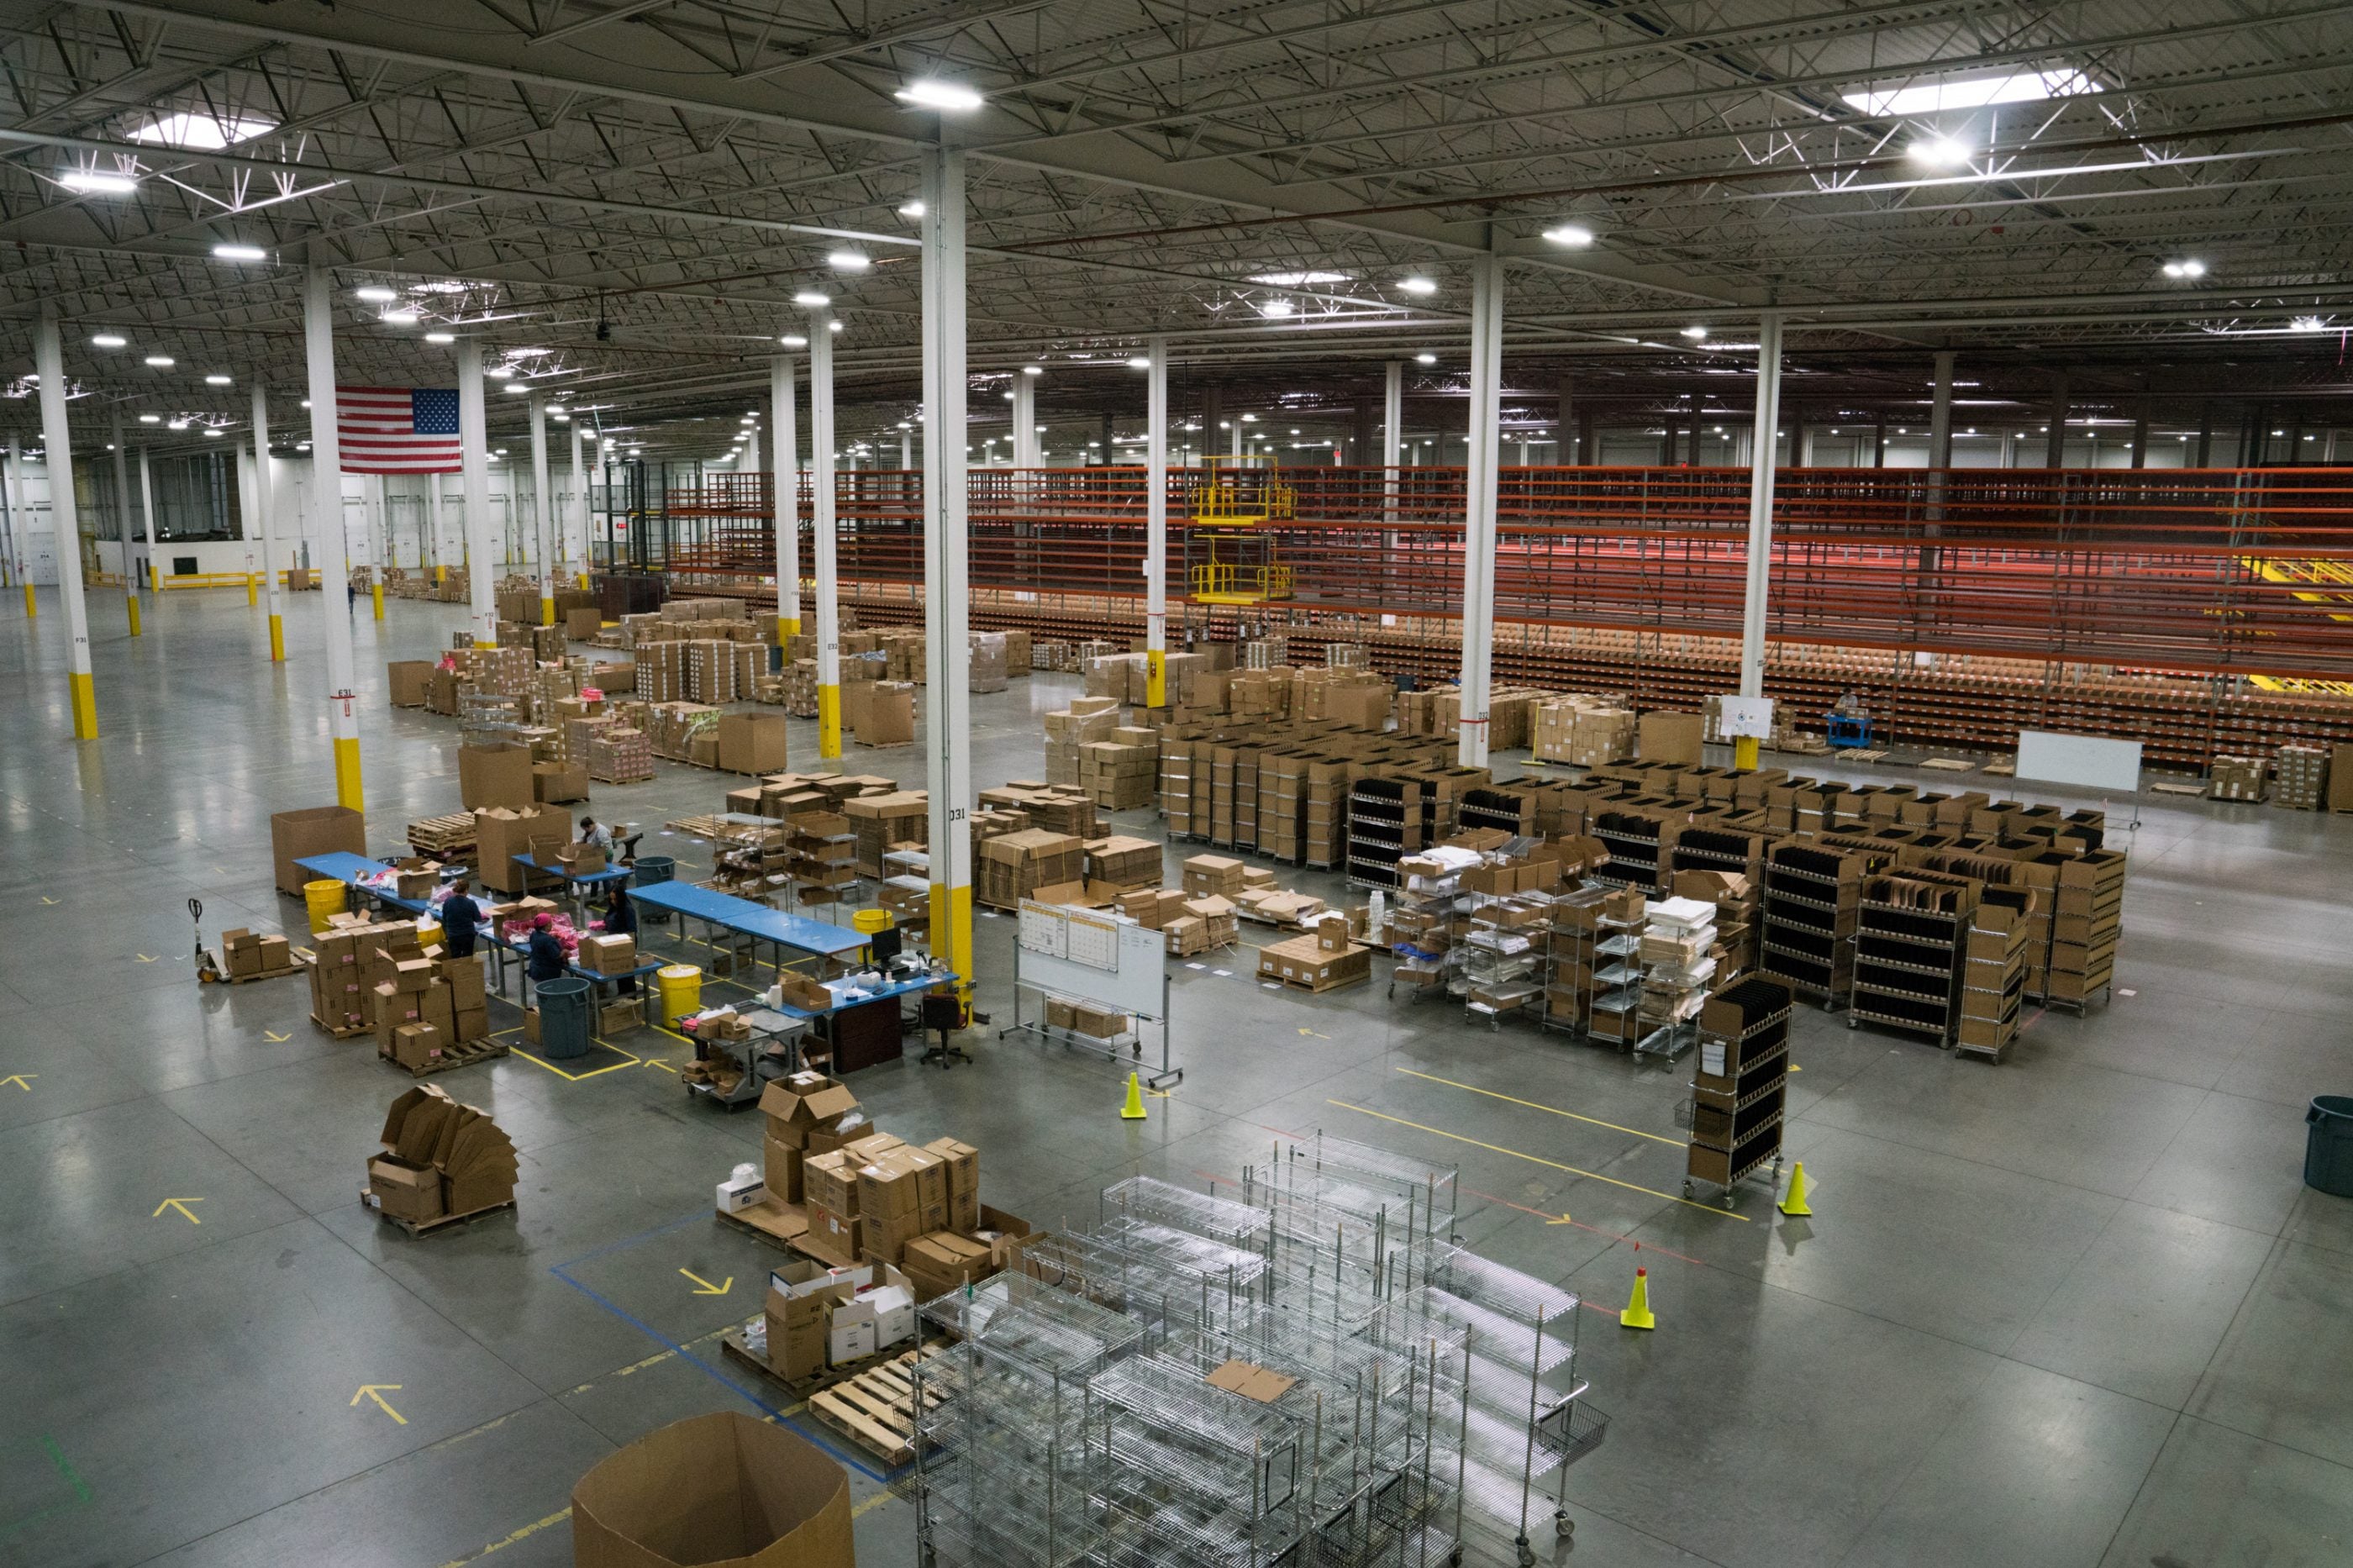 The warehouse is a new fulfillment center run by Radial, handling some of the biggest brands in cosmetics.